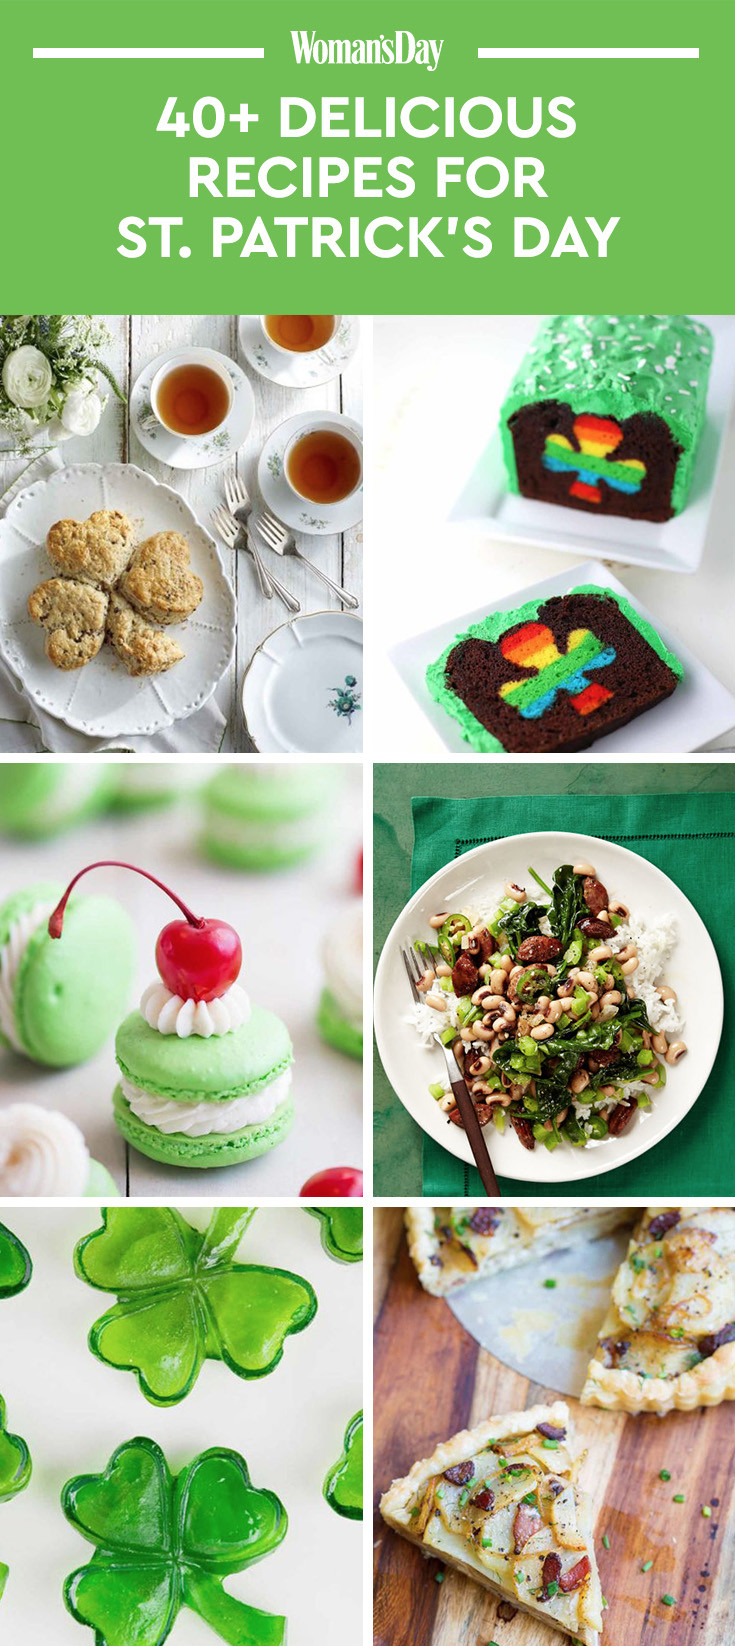 Recipes For St Patrick's Day Party
 45 St Patricks Day Recipes – Irish Food Ideas for St